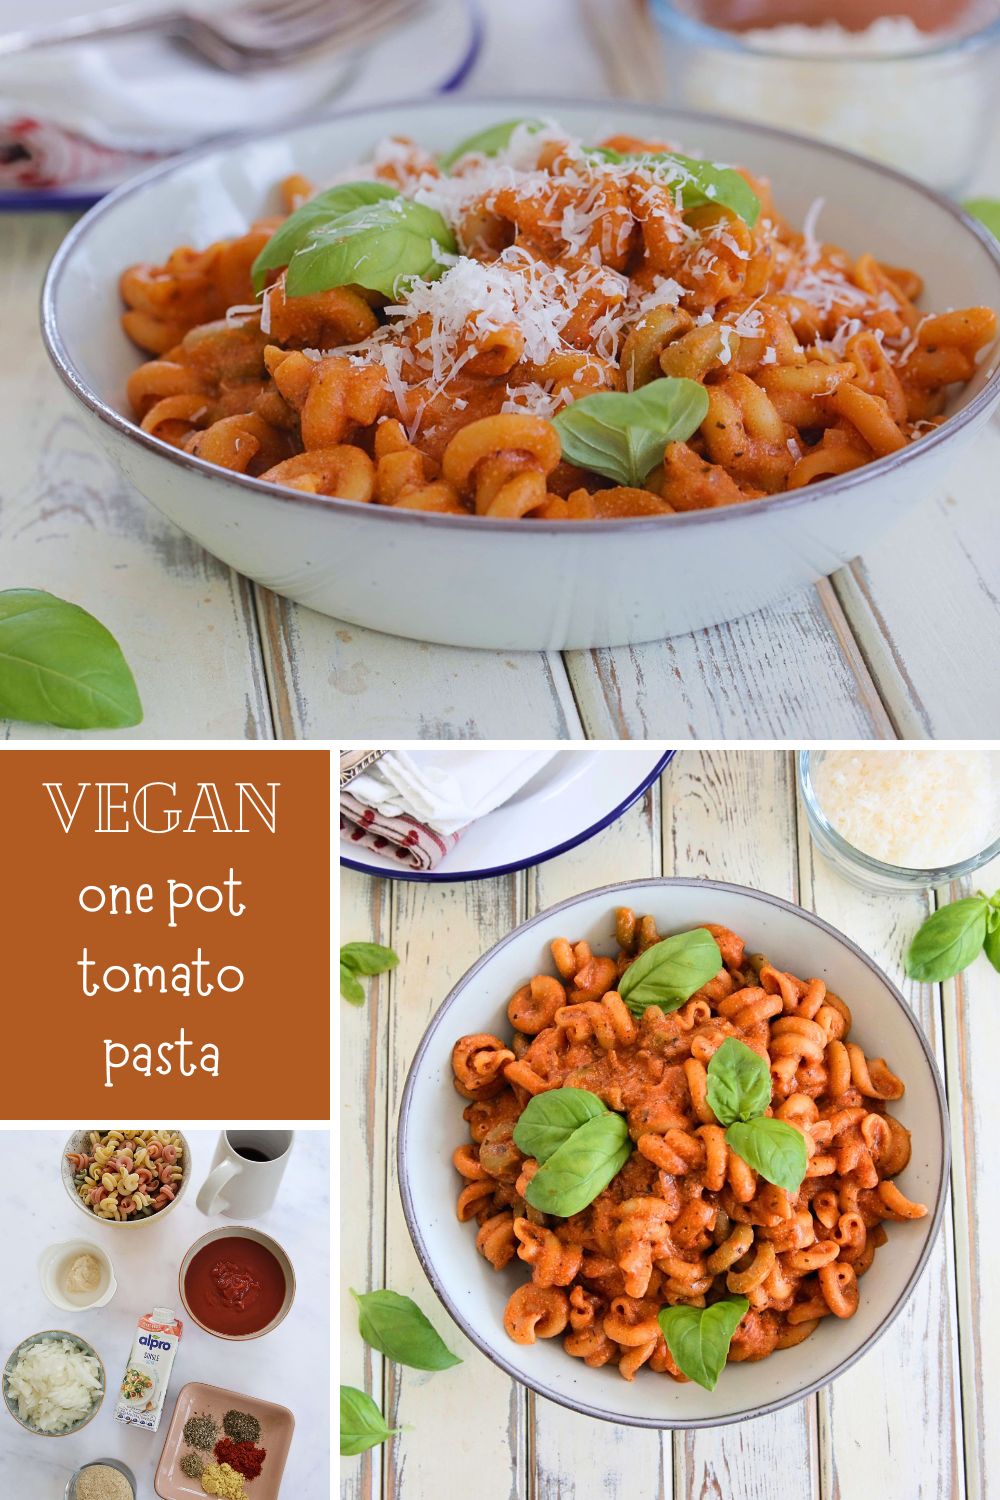 Dinner is made simple with this creamy tomato pasta sauce all cooked in one pan. It's an easy dinner recipe that uses minimal ingredients to make the silky tomato sauce from scratch. Recipe on thecookandhim.com #onepanmeal #tomatopasta #veganpastasauce #easymealideas #easydinnerrecipes